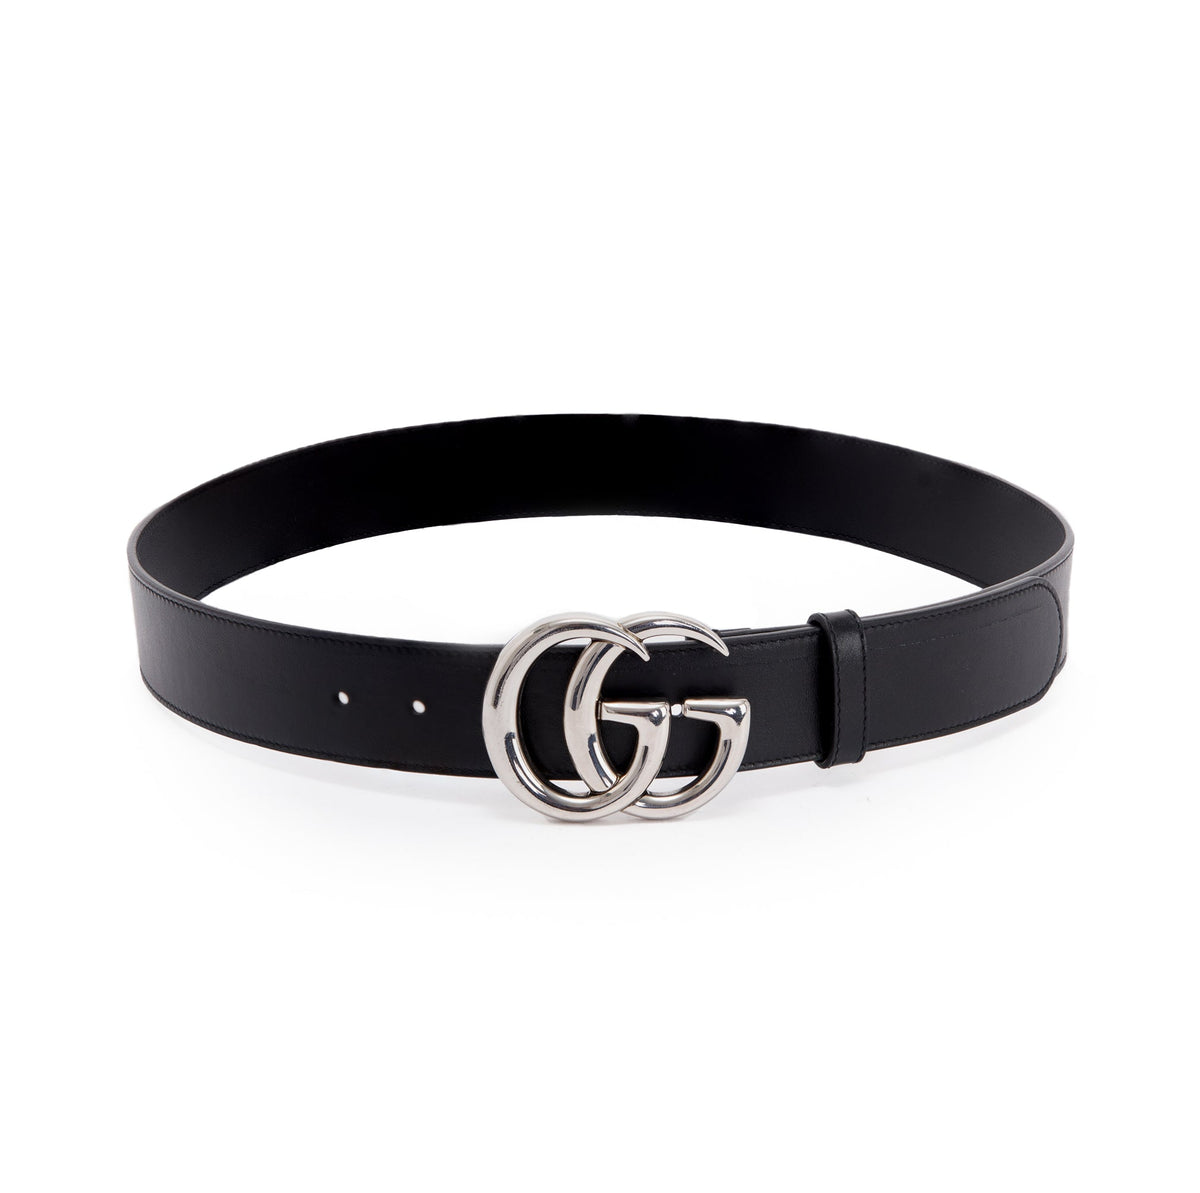 Gucci 2015 Re-edition Wide Leather Belt - Black